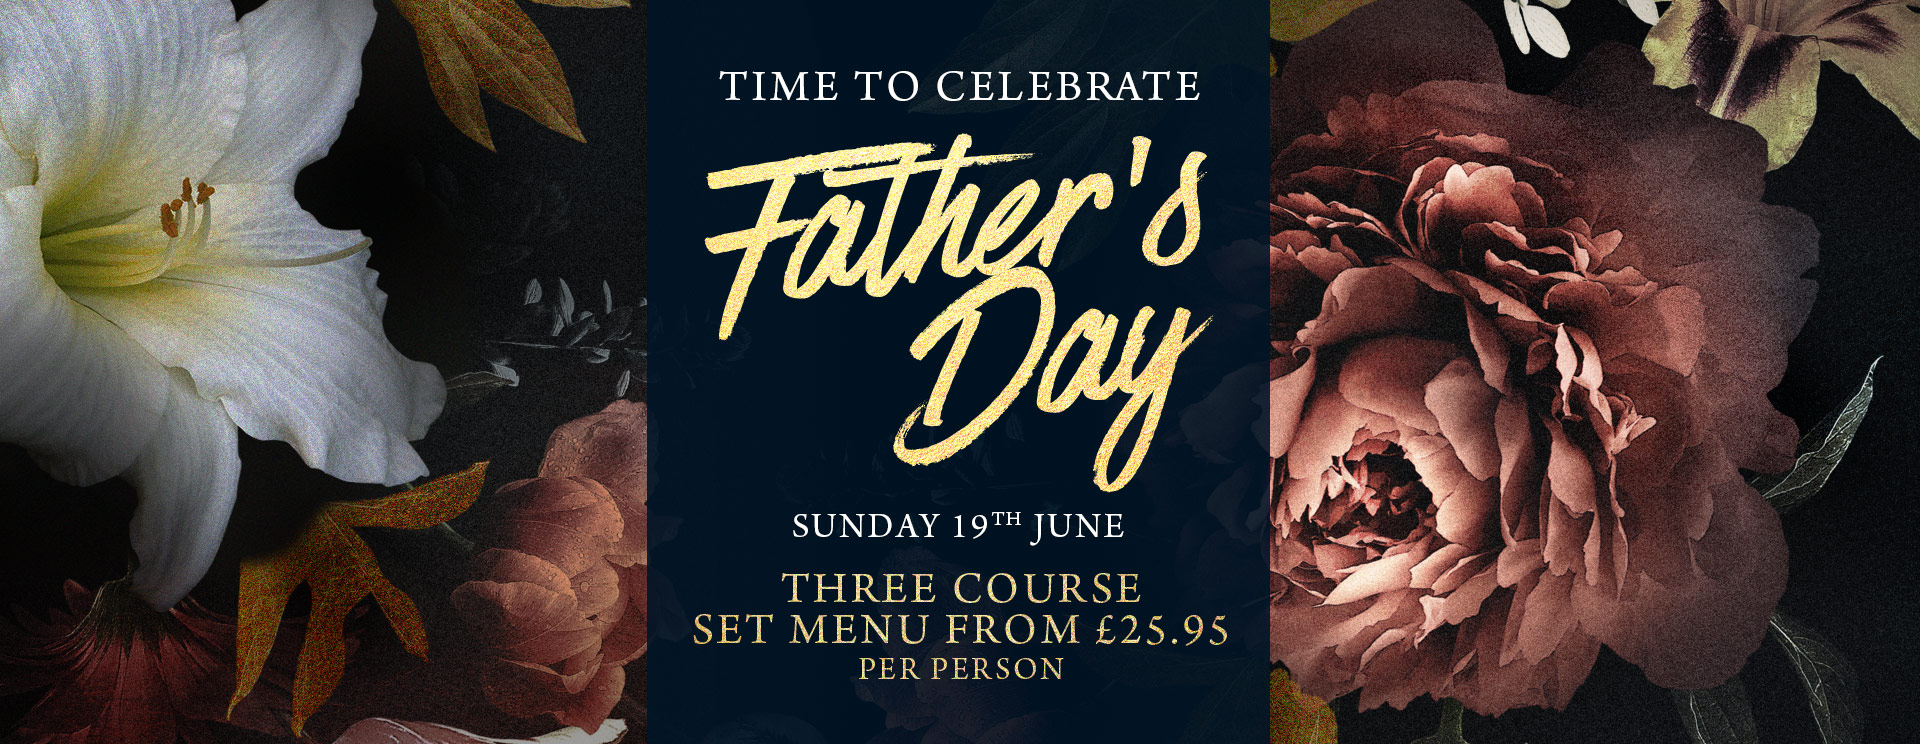 Fathers Day at One Kew Road